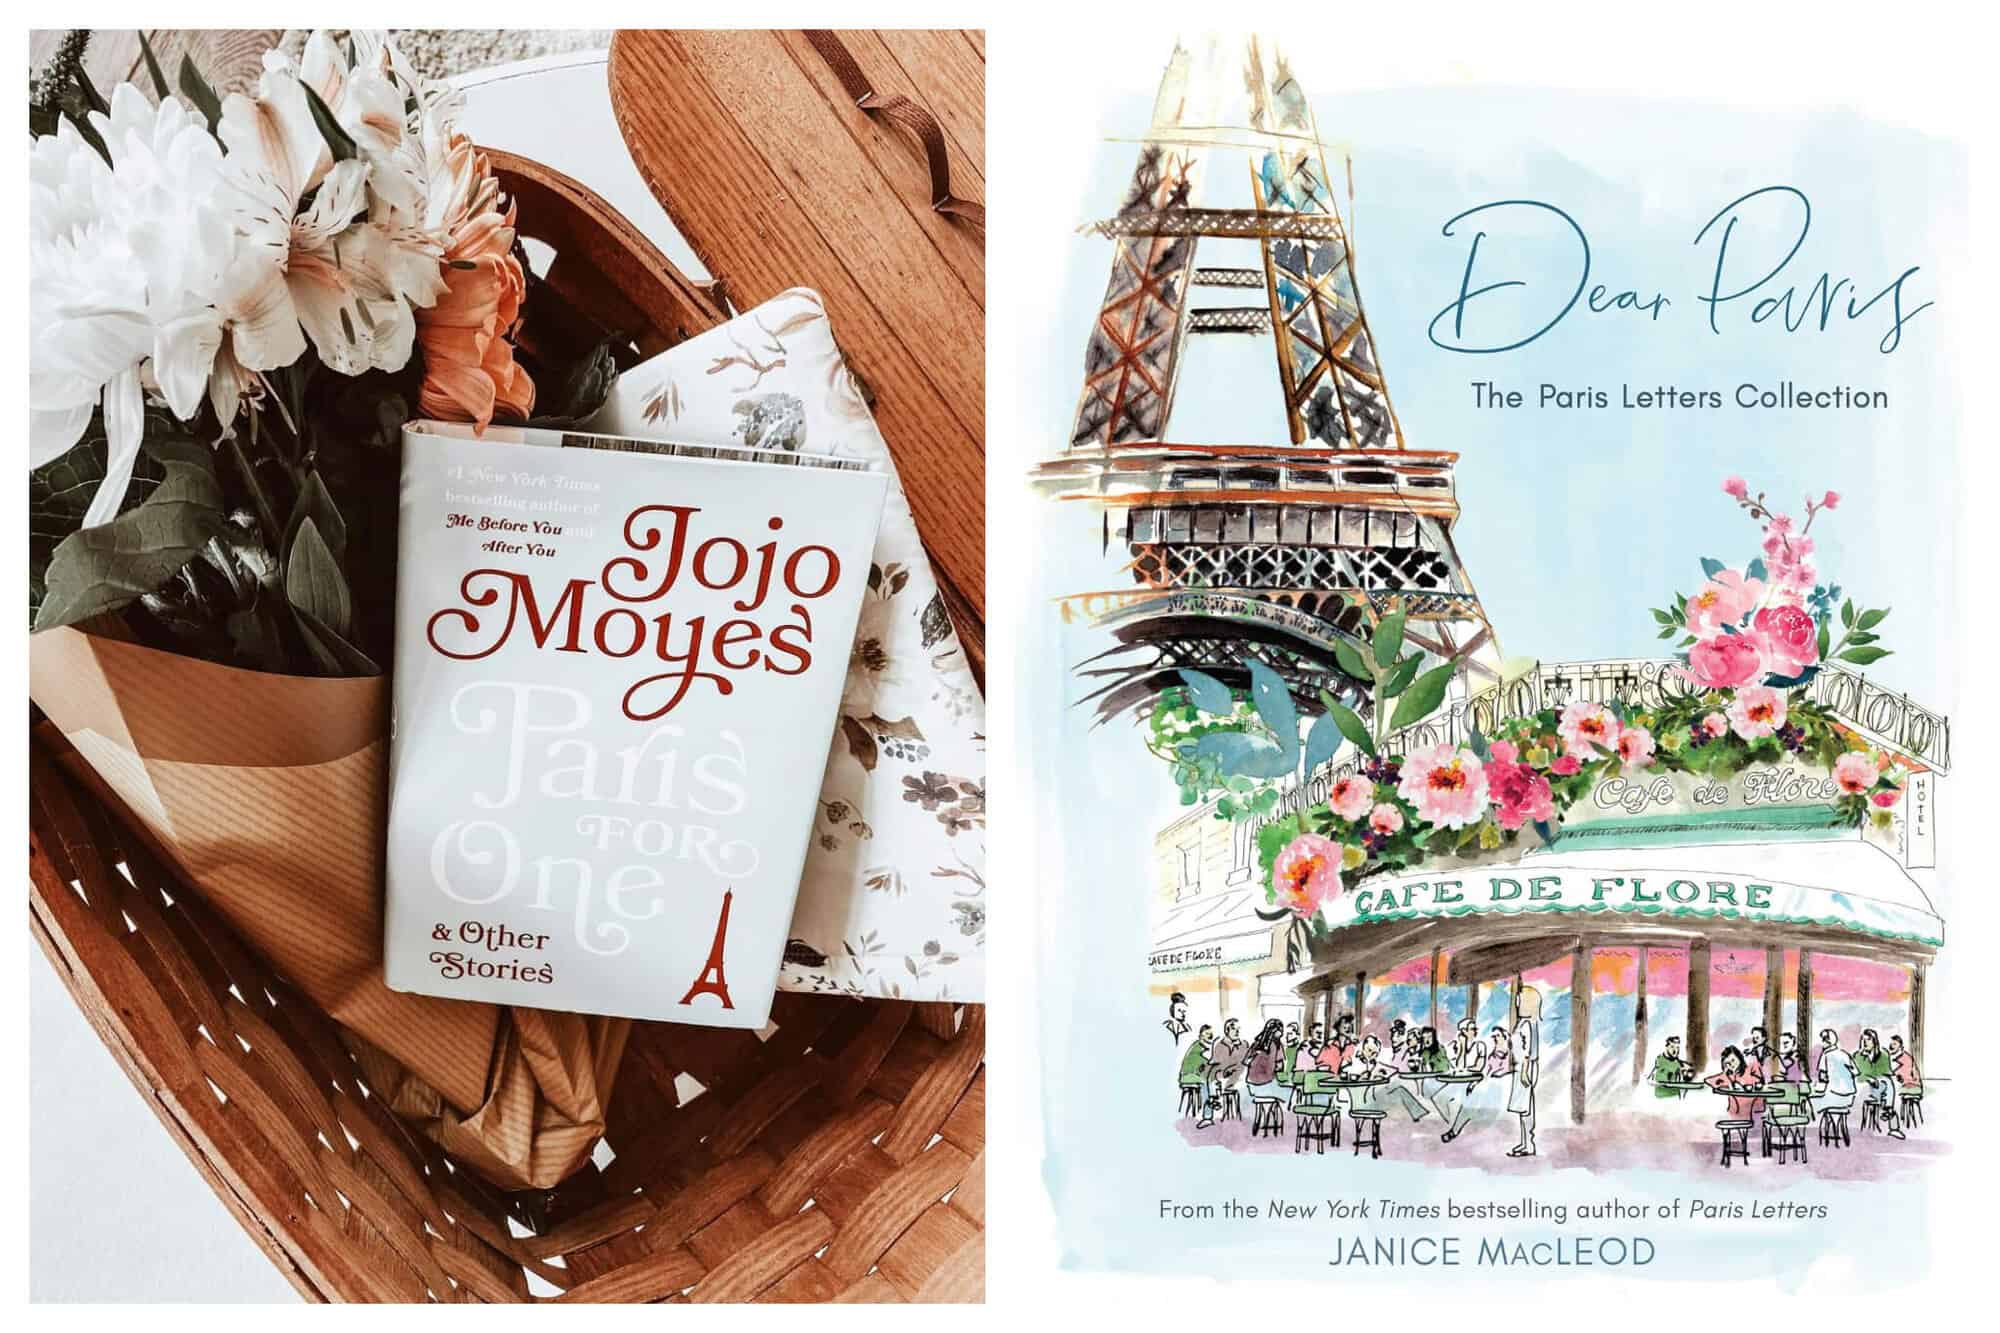 Left: an aeriaview of the book "Paris for One" by Jojo Moyes. The book is in a basket with a bouquet of pink and white flowers and a wrapped gift. The title is written in white and the name of the author is written in red. Right: The cover of "Paris Letters" by Janice MacLeod. There is an illustration of the Eiffel Tower and the Café de Flore. The title and the author's name is written in blue.